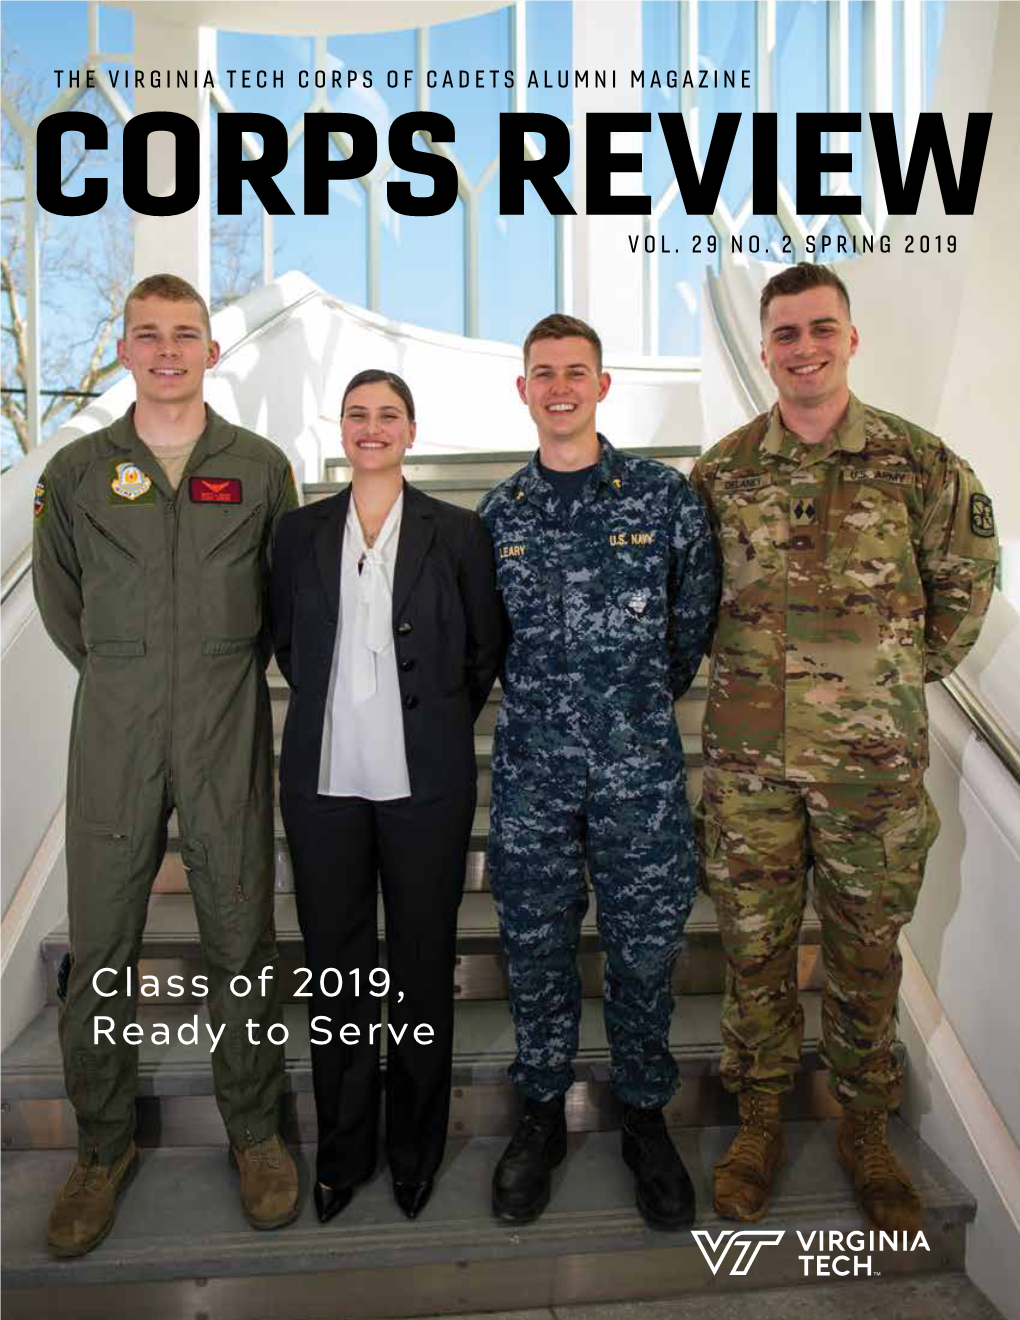 Corps-Review-Spring-2019.Pdf (3.719Mb)